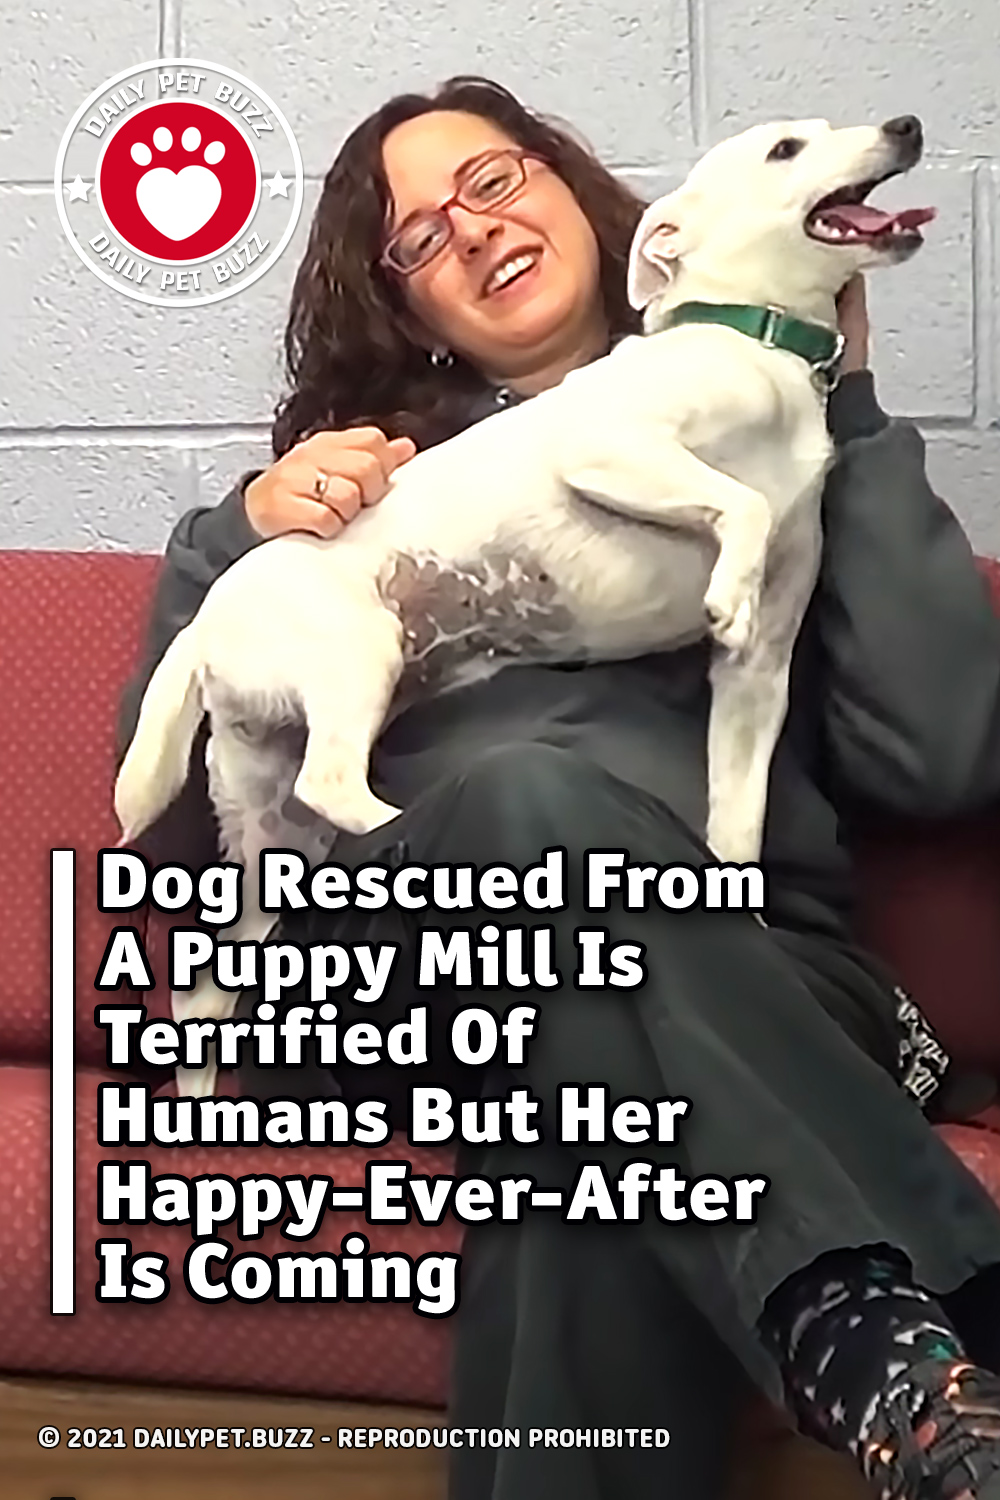 Dog Rescued From A Puppy Mill Is Terrified Of Humans But Her Happy-Ever-After Is Coming